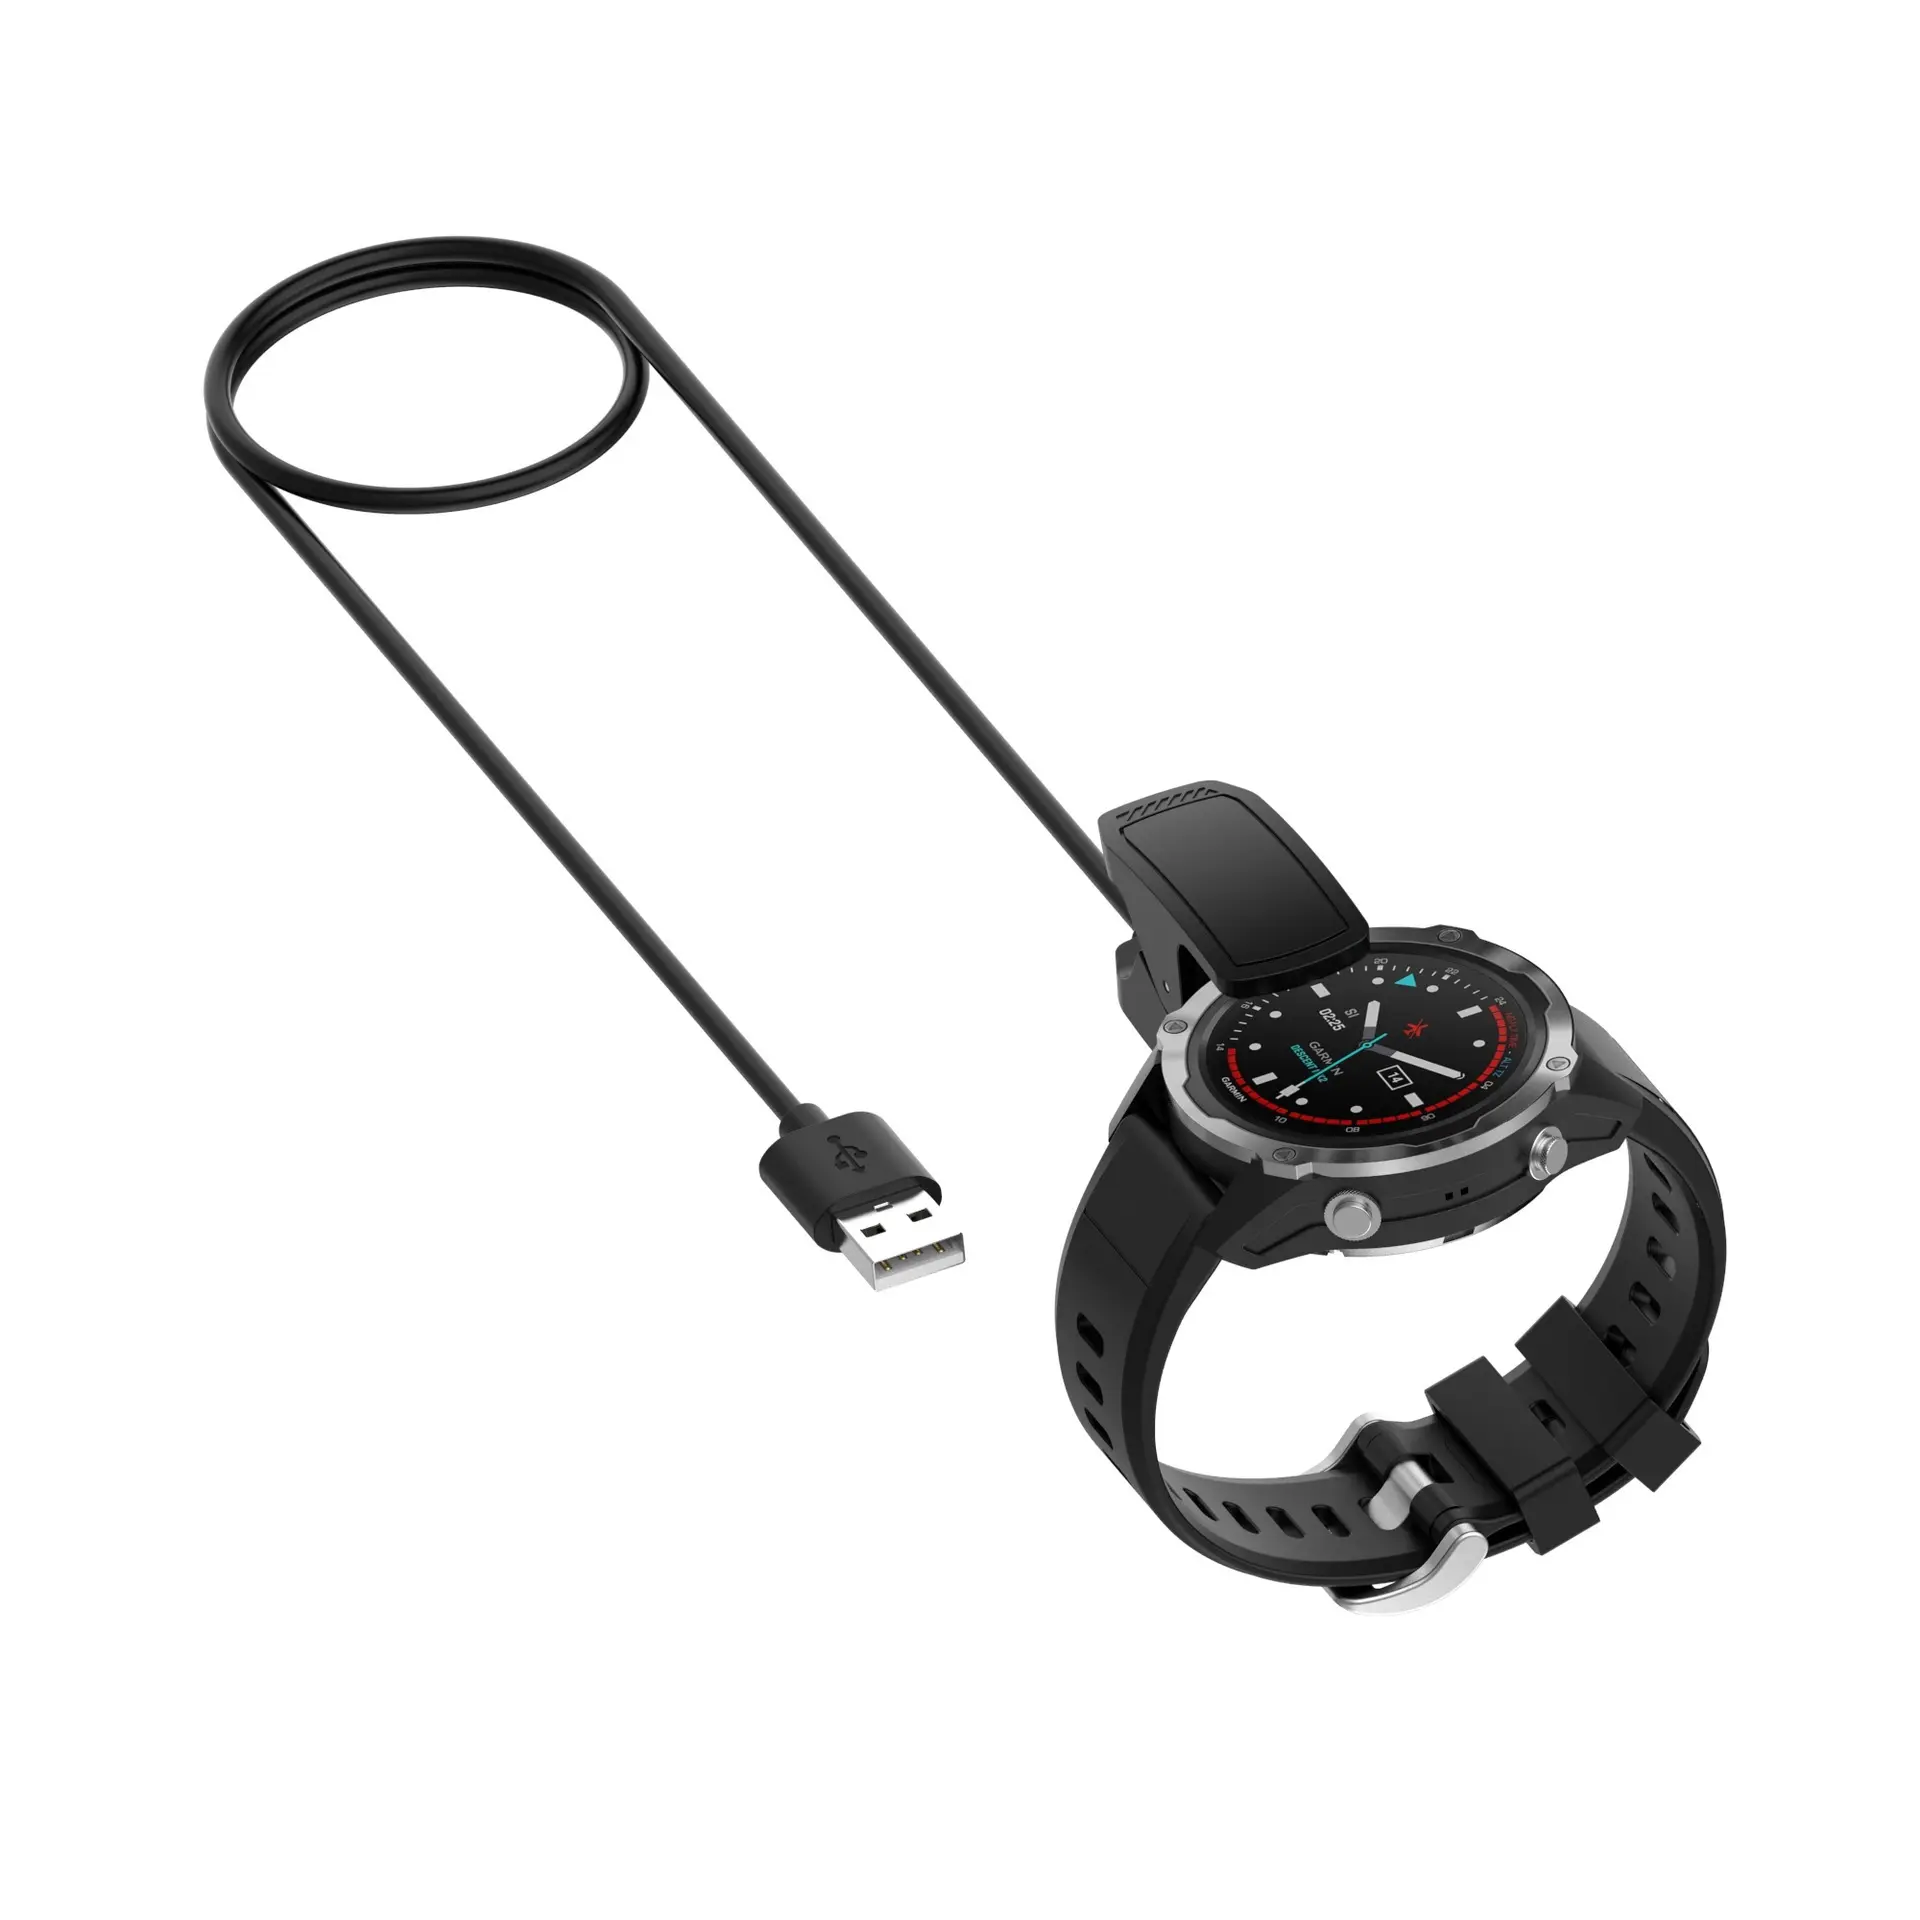 Newest Watch Charger for Garmin Descent G1 Charger Dock Station Clip Cradle Charging Data Cable for Garmin Descent G1 Charger